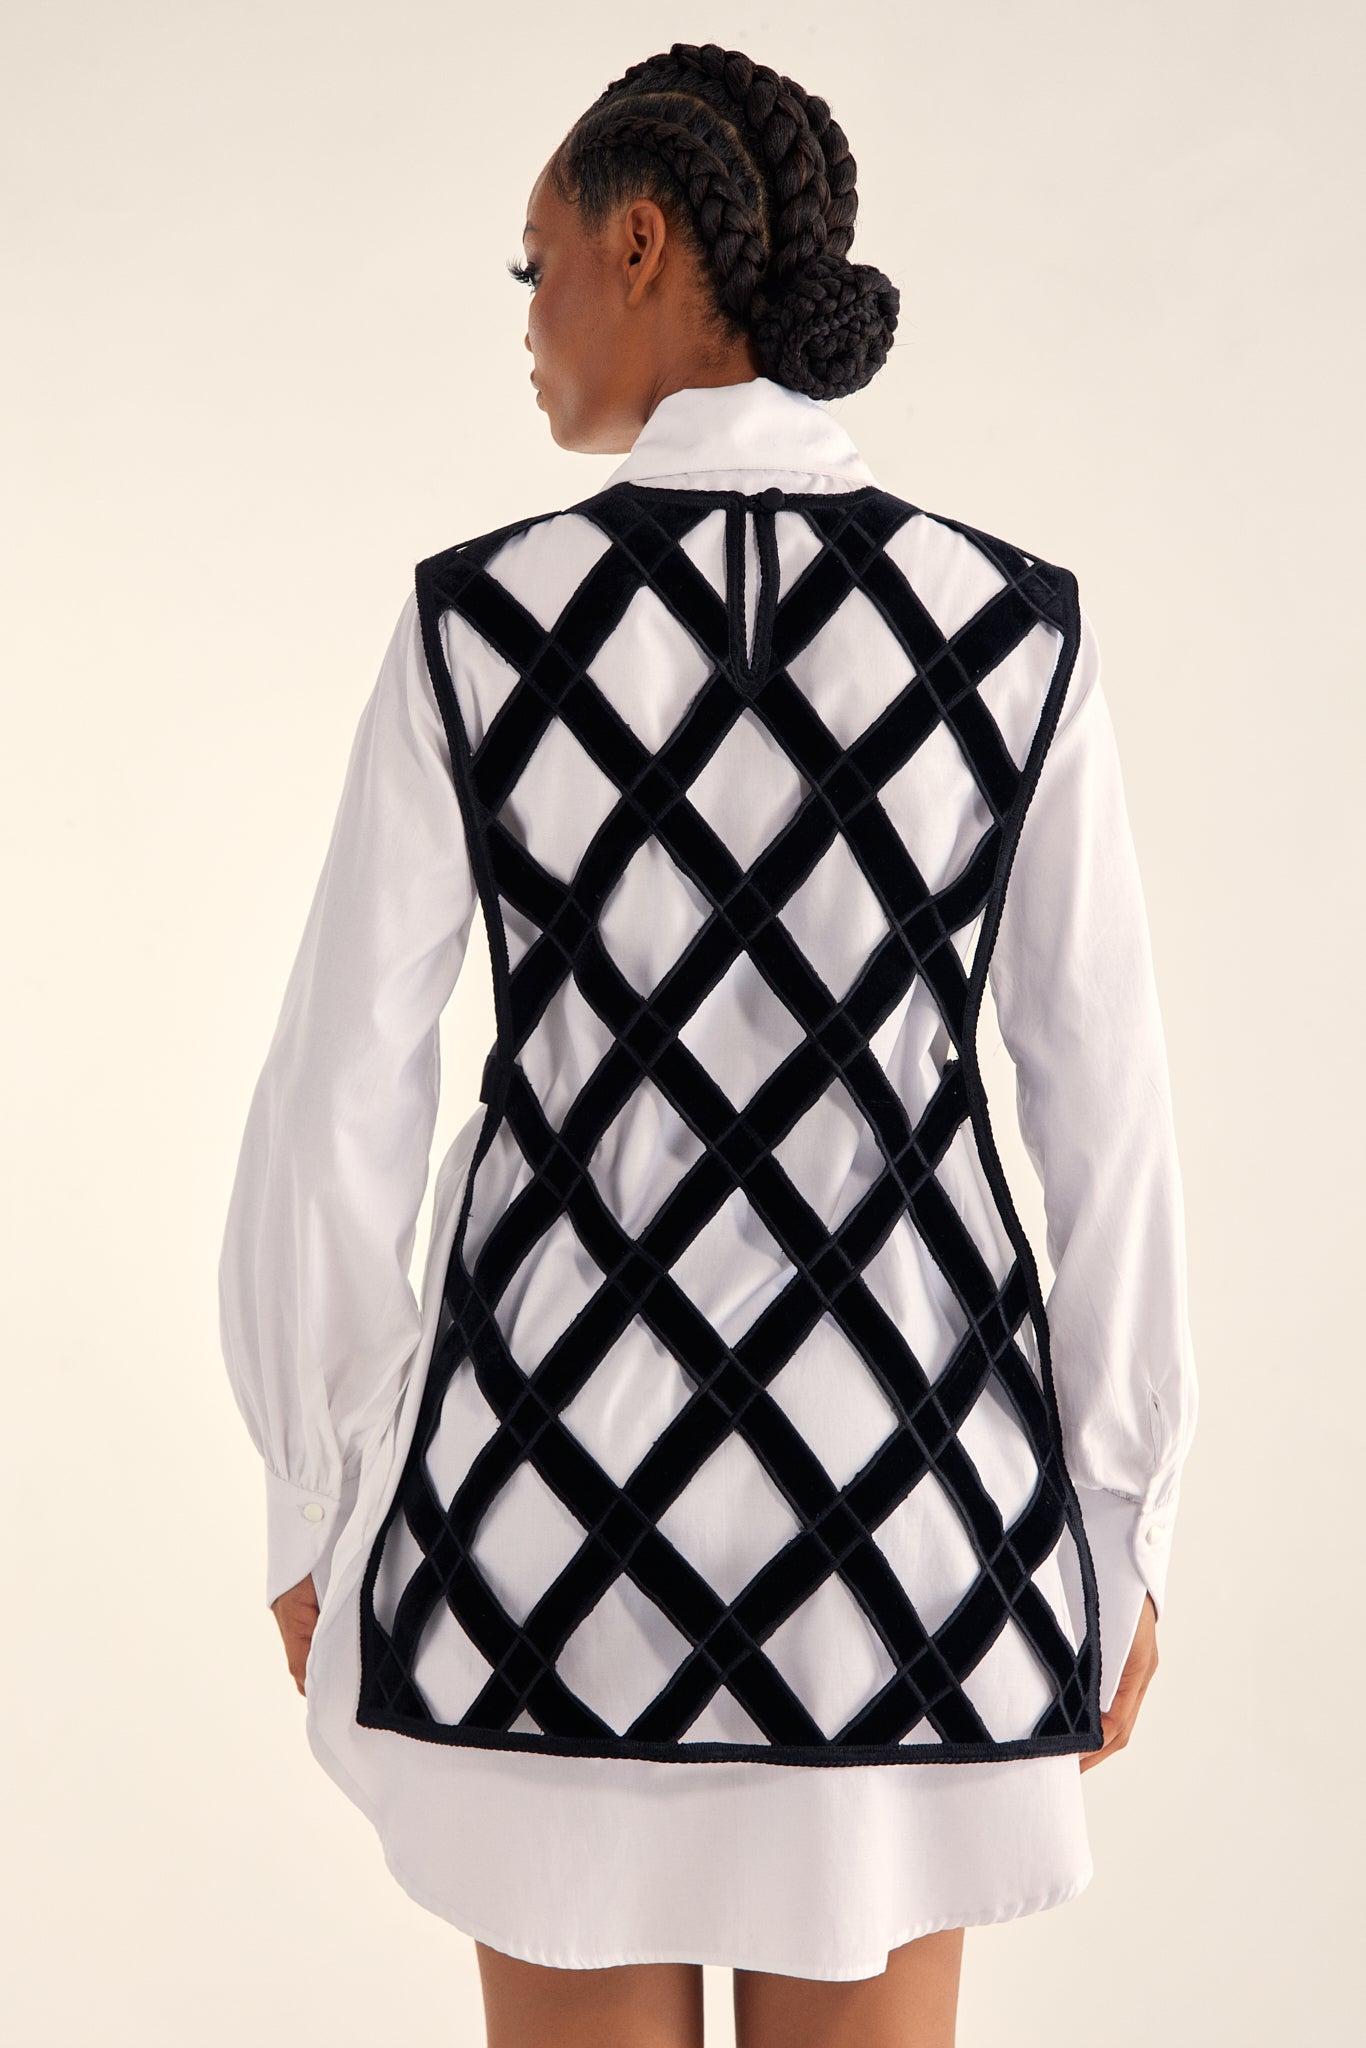 THE EMBROIDERED TUNIC CAGE